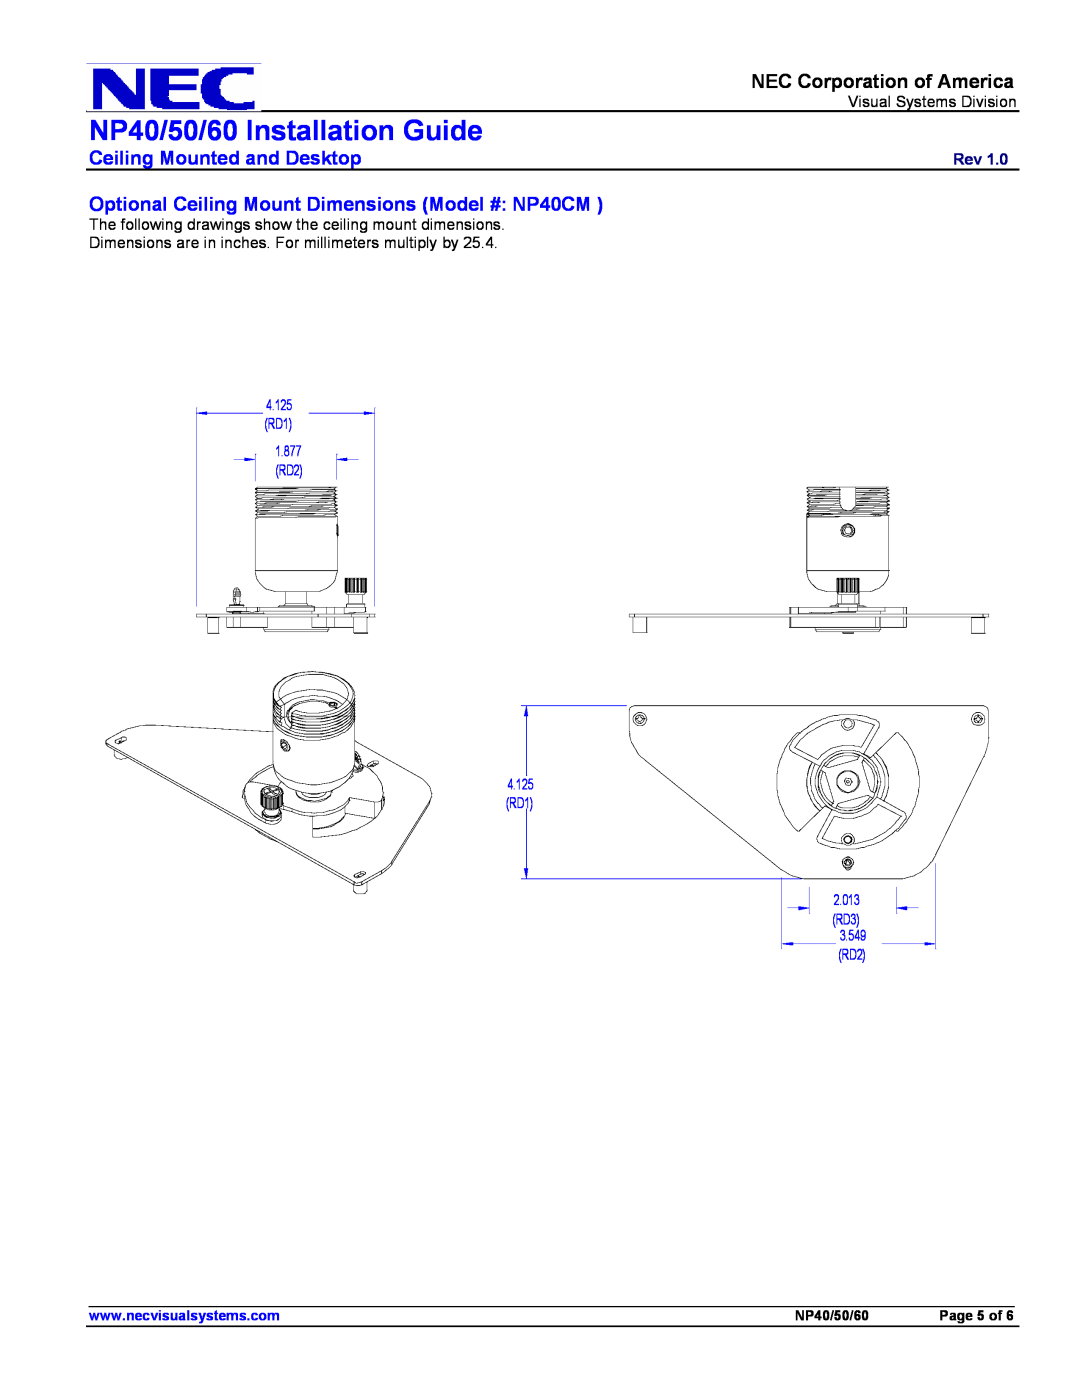 NEC NP60 Optional Ceiling Mount Dimensions Model # NP40CM, NP40/50/60 Installation Guide, NEC Corporation of America 